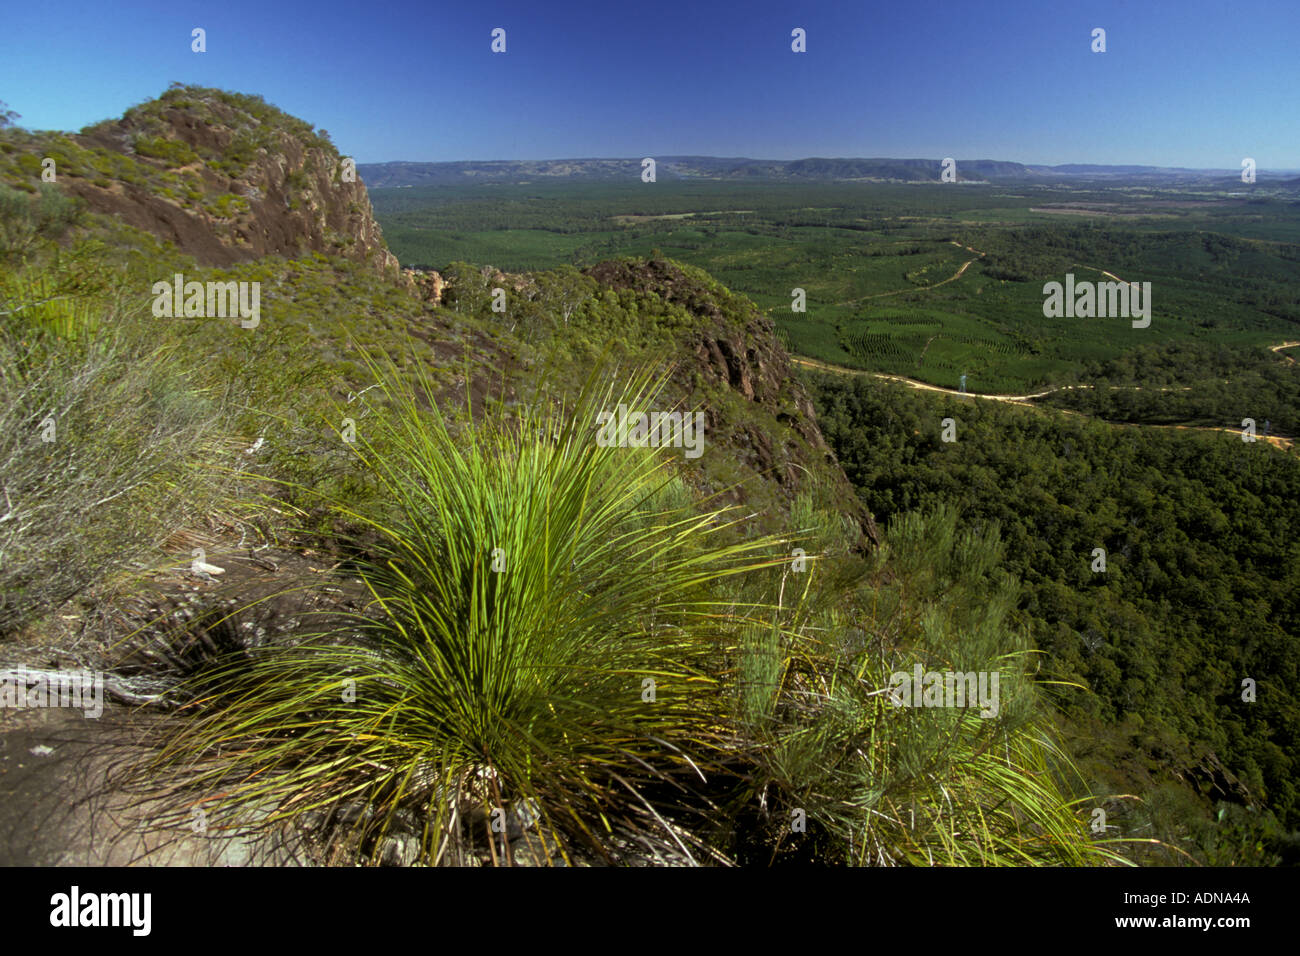 Australia Queensland Glasshouse Mtns view from the top of Mt Ngungun Stock Photo